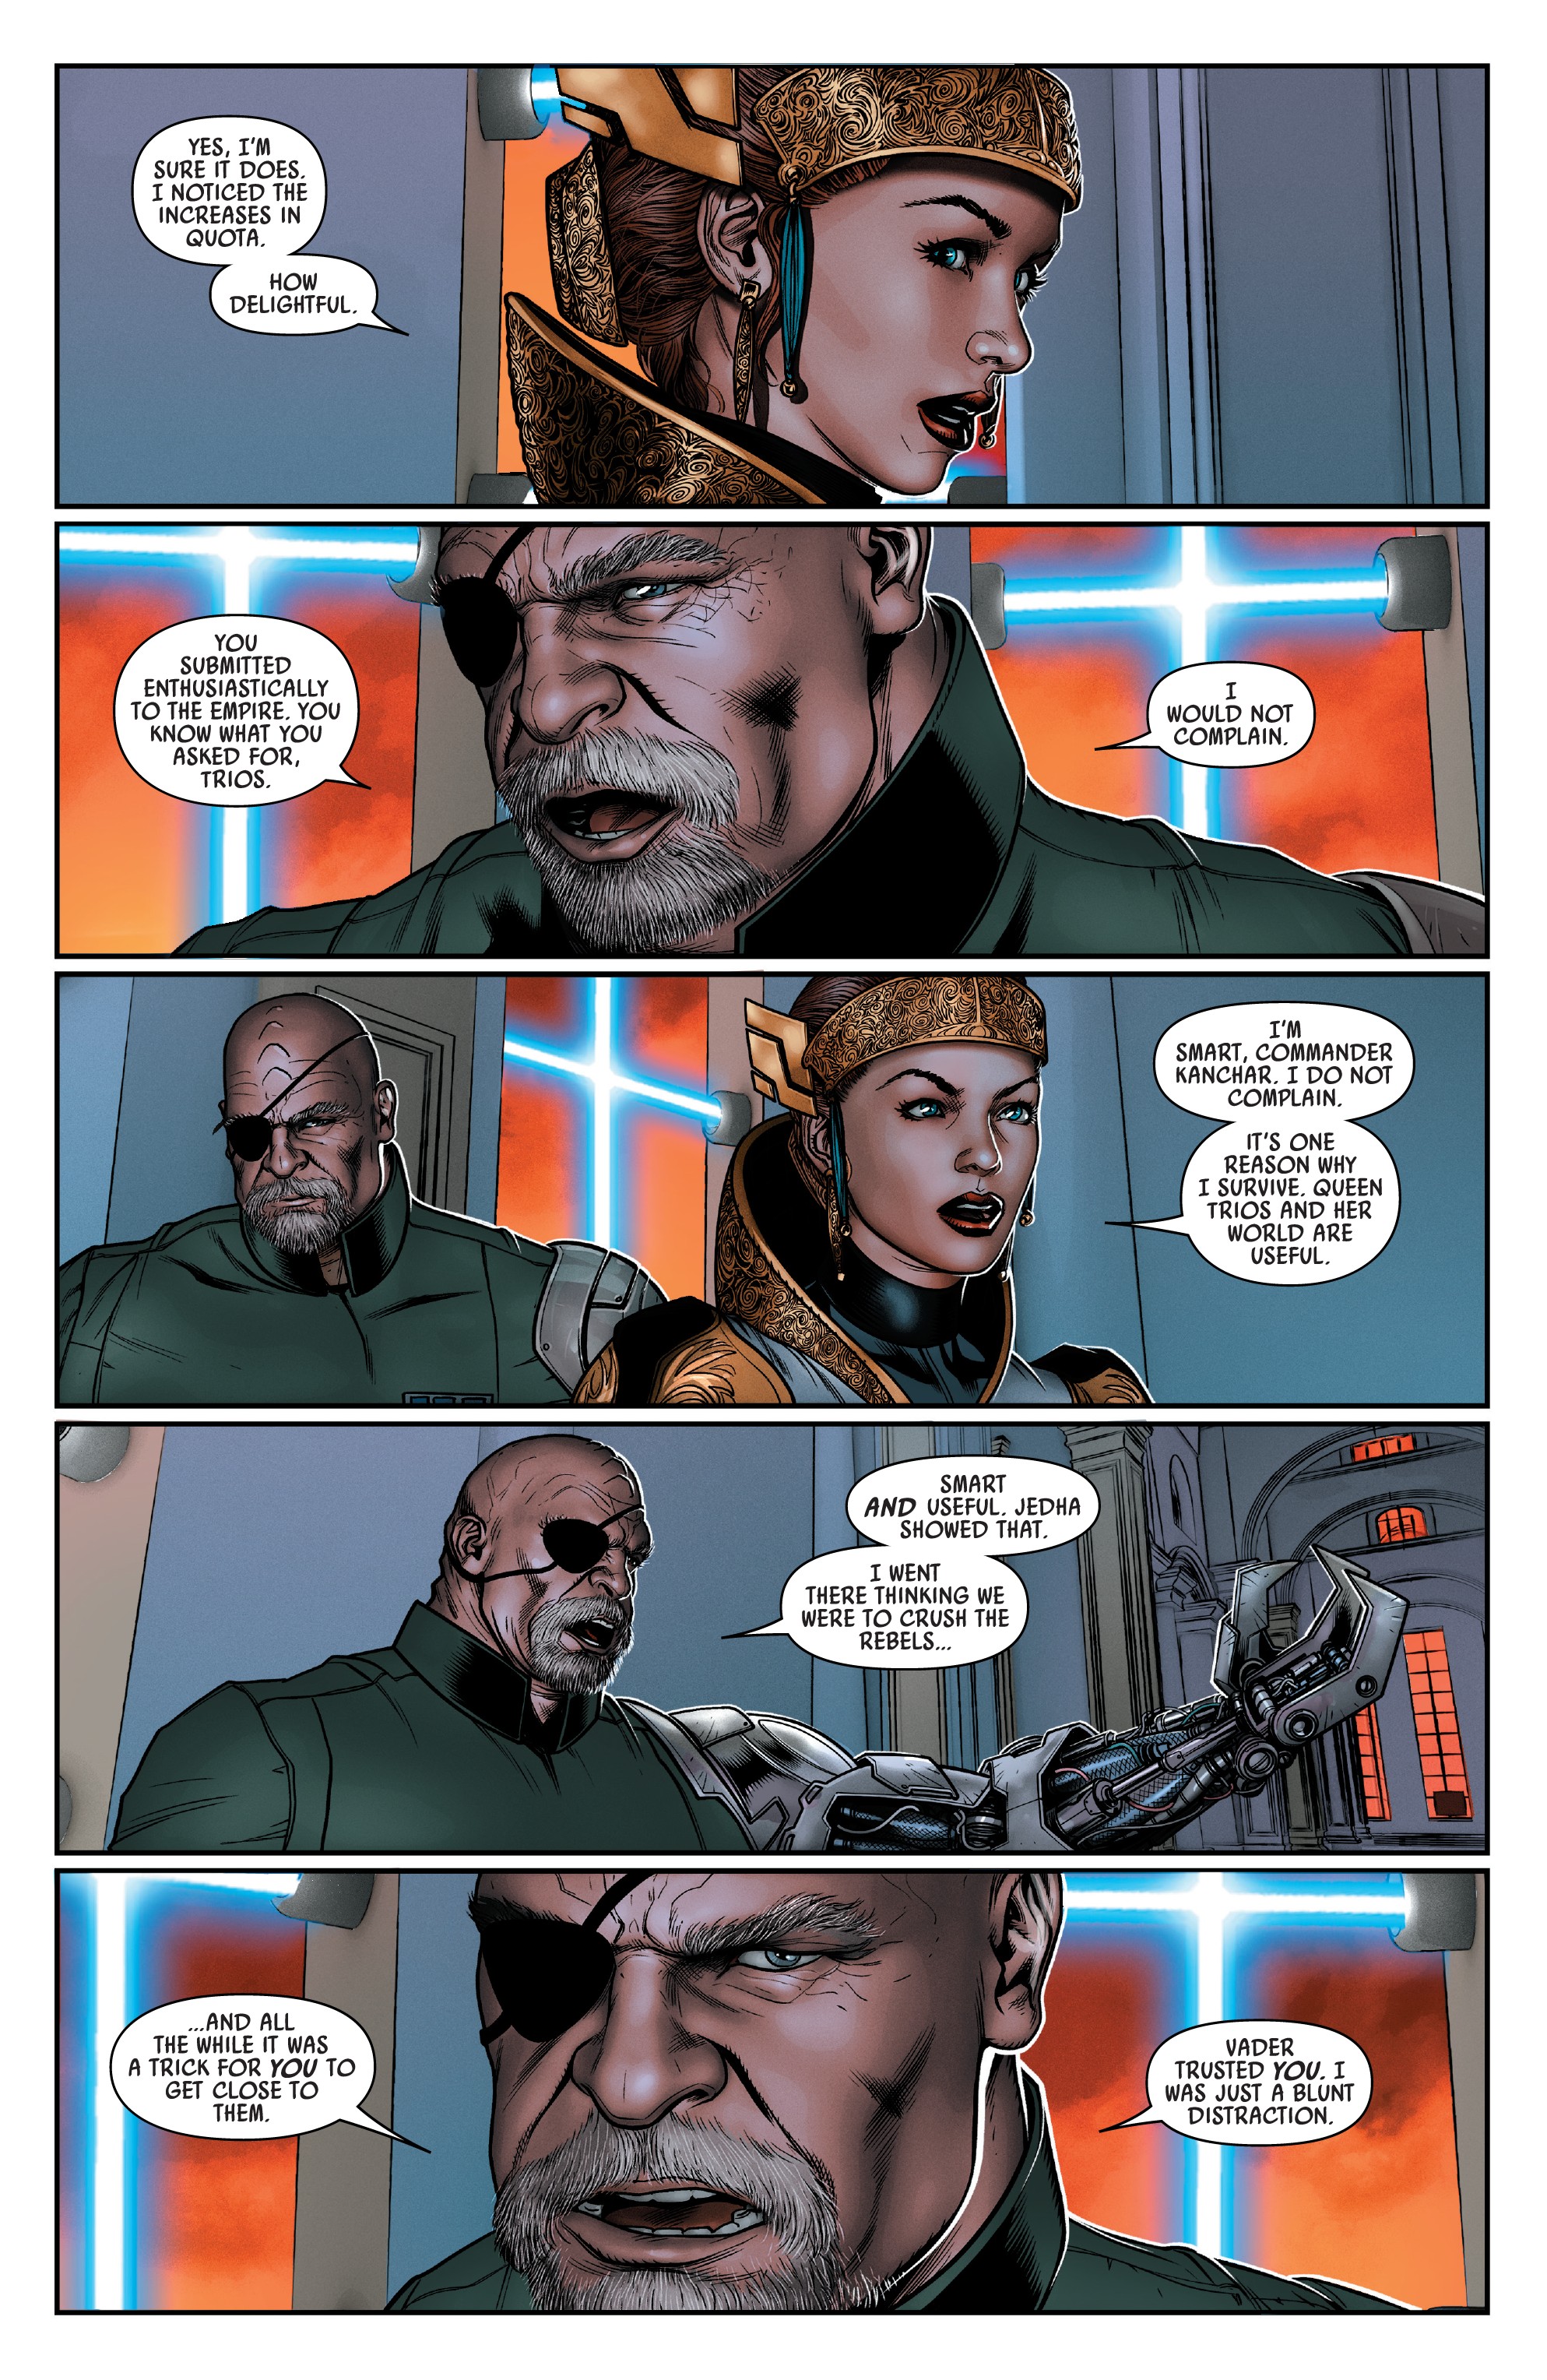 Star Wars (2015-): Chapter 63 - Page 4